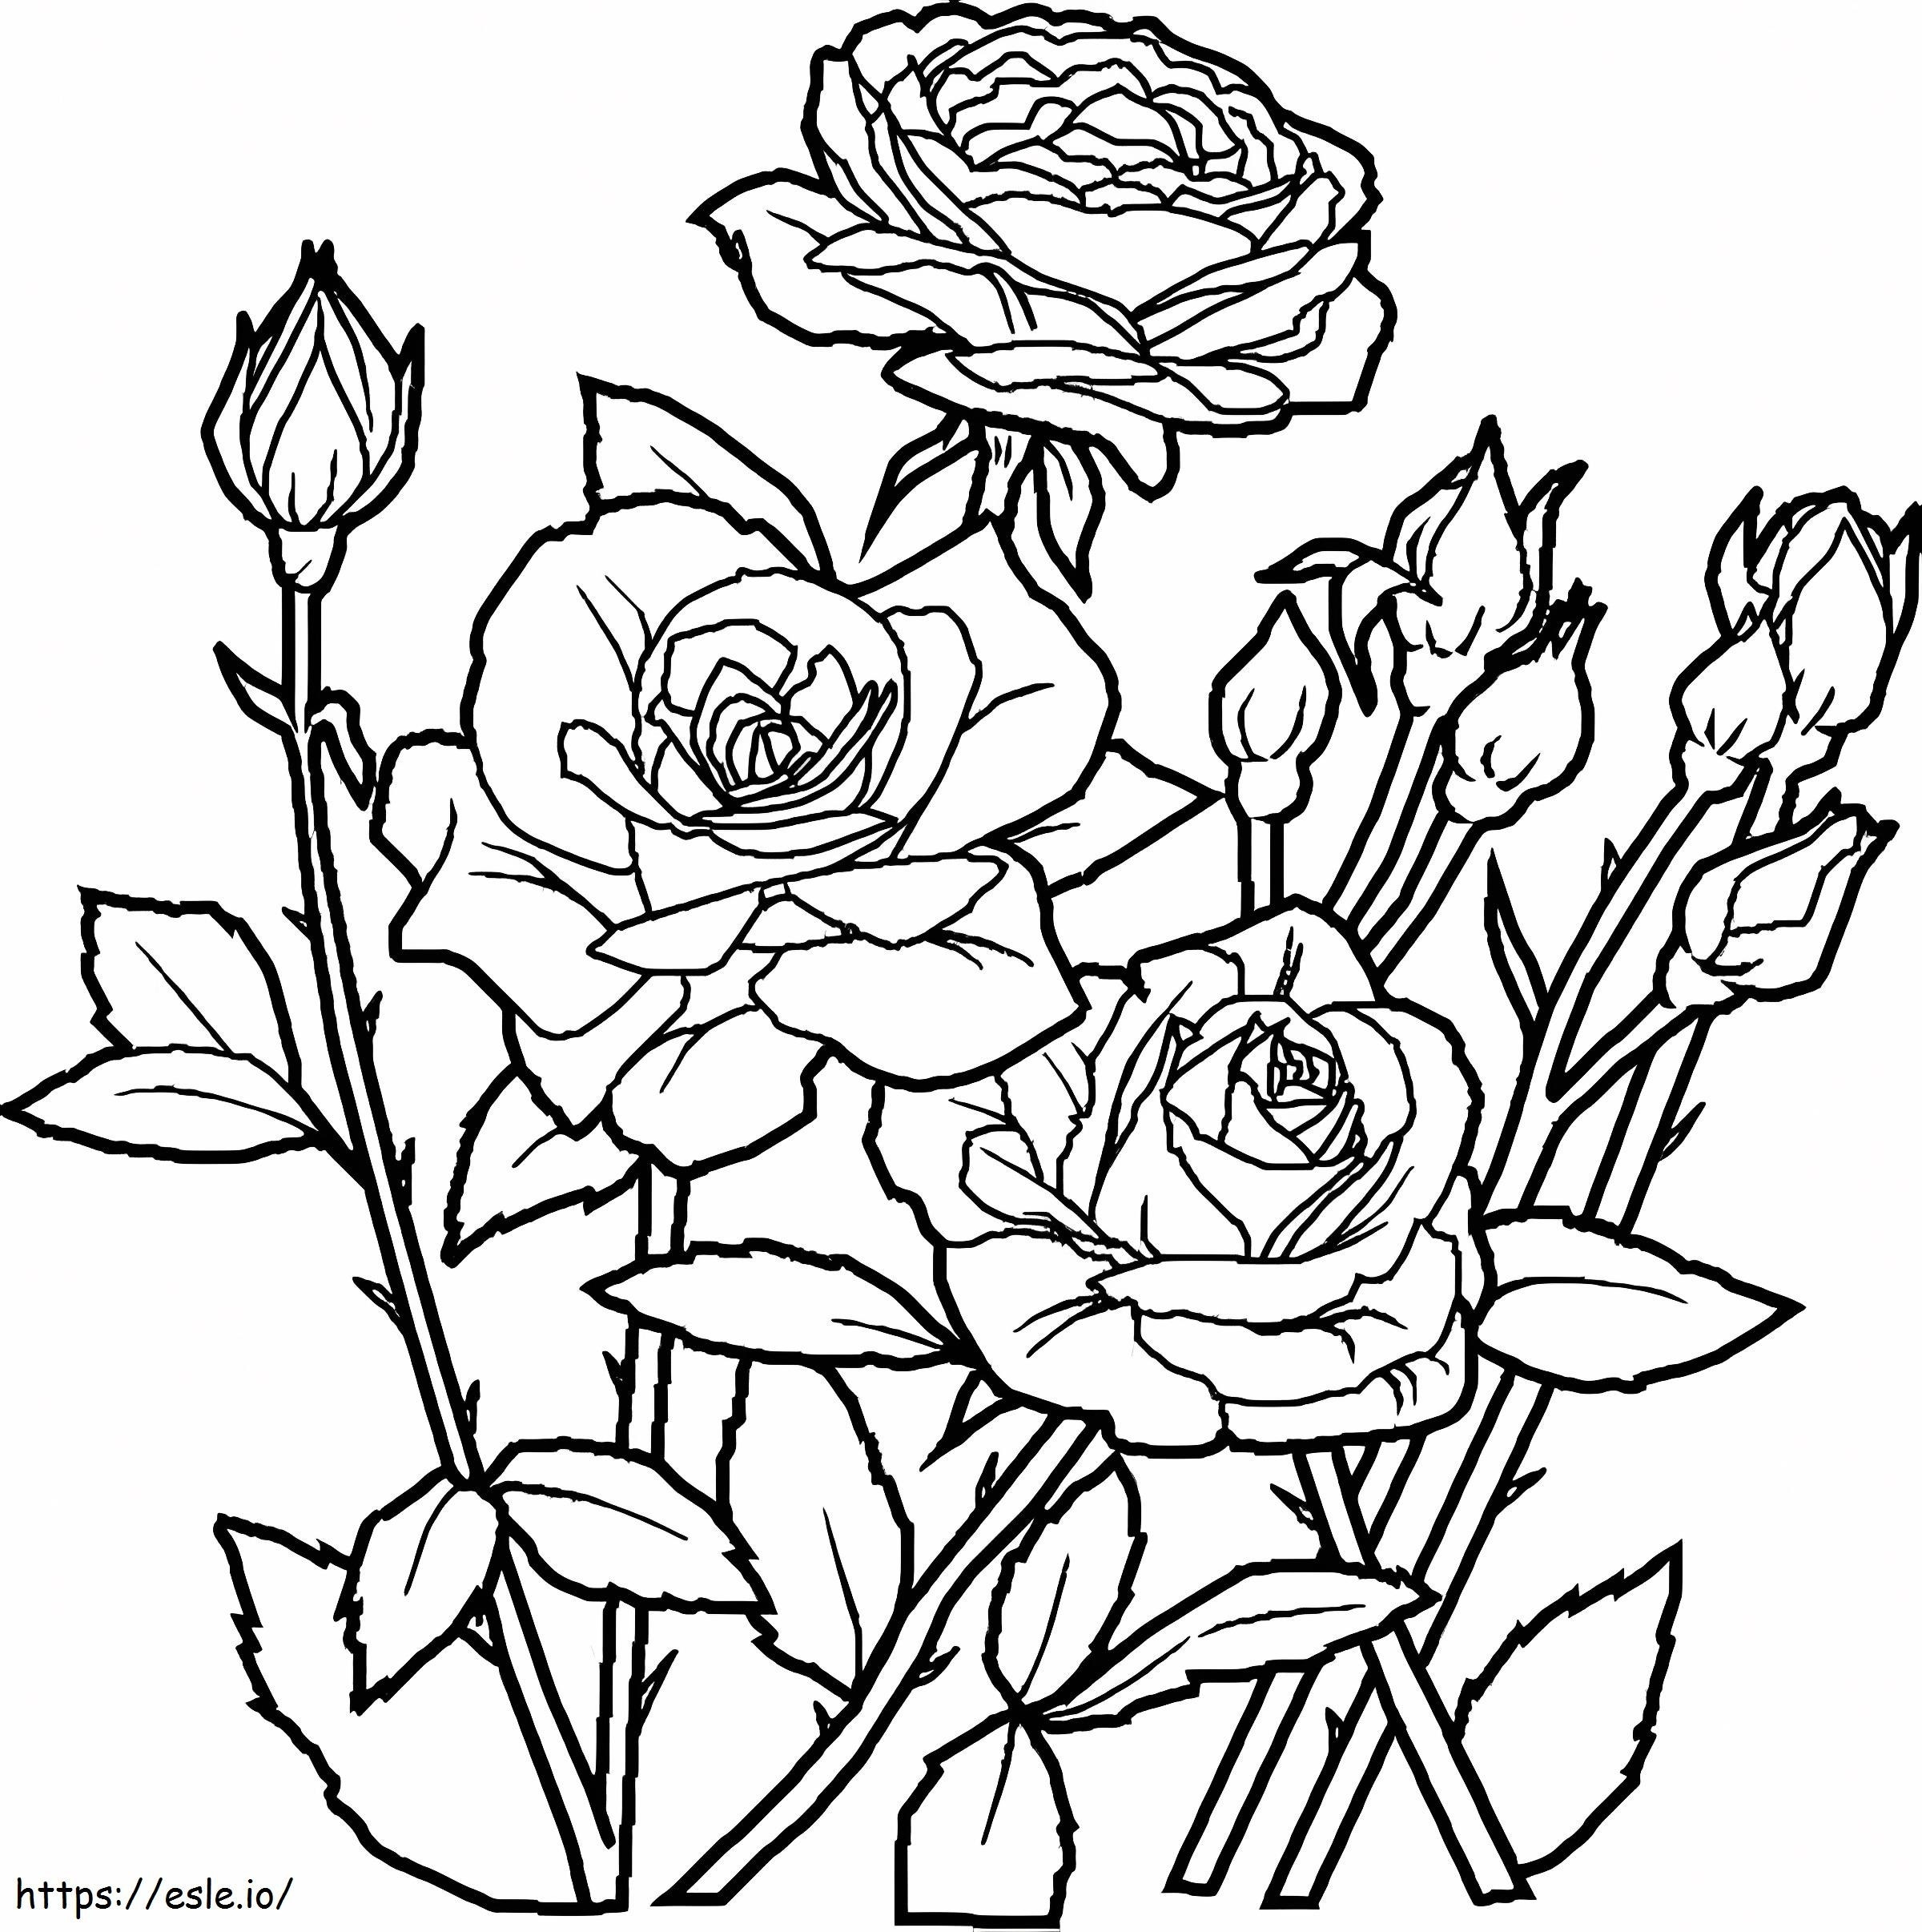 Rose Flower In The Garden coloring page